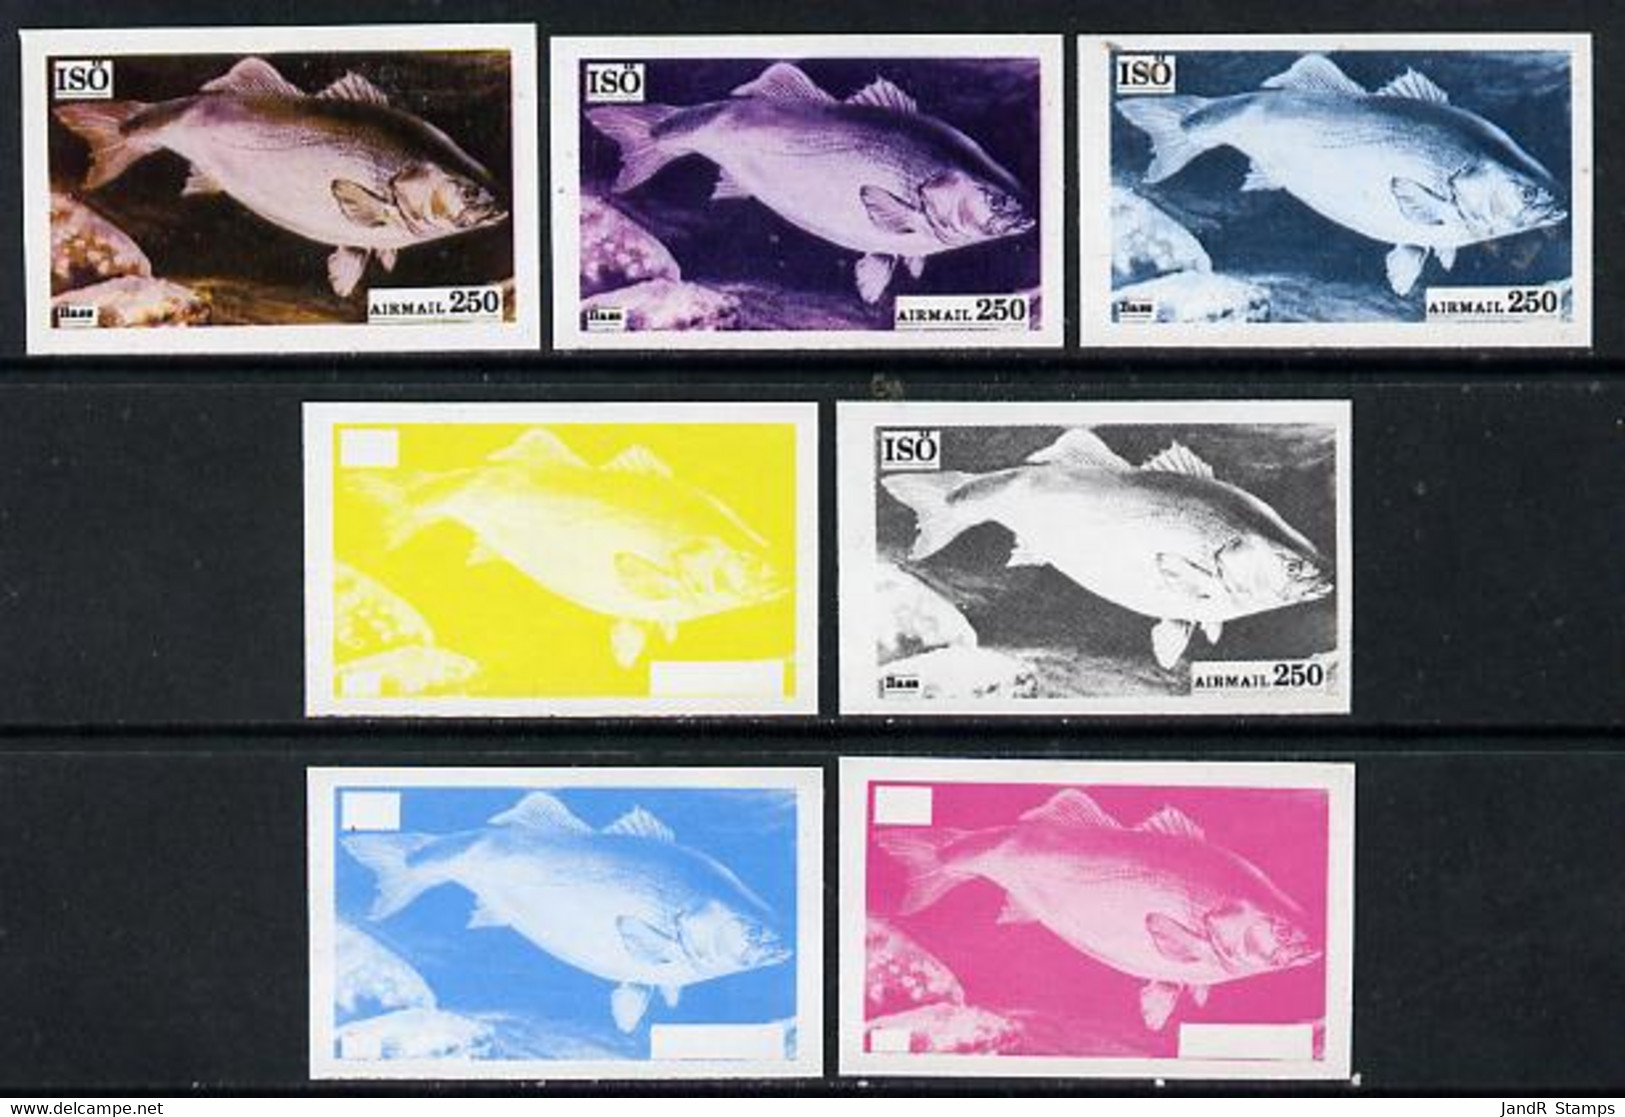 Iso - Sweden 1973 Fish 250 (Bass) Set Of 7 Imperf Progressive Colour Proofs Comprising The 4 Individual Colours Plus 2, - Local Post Stamps